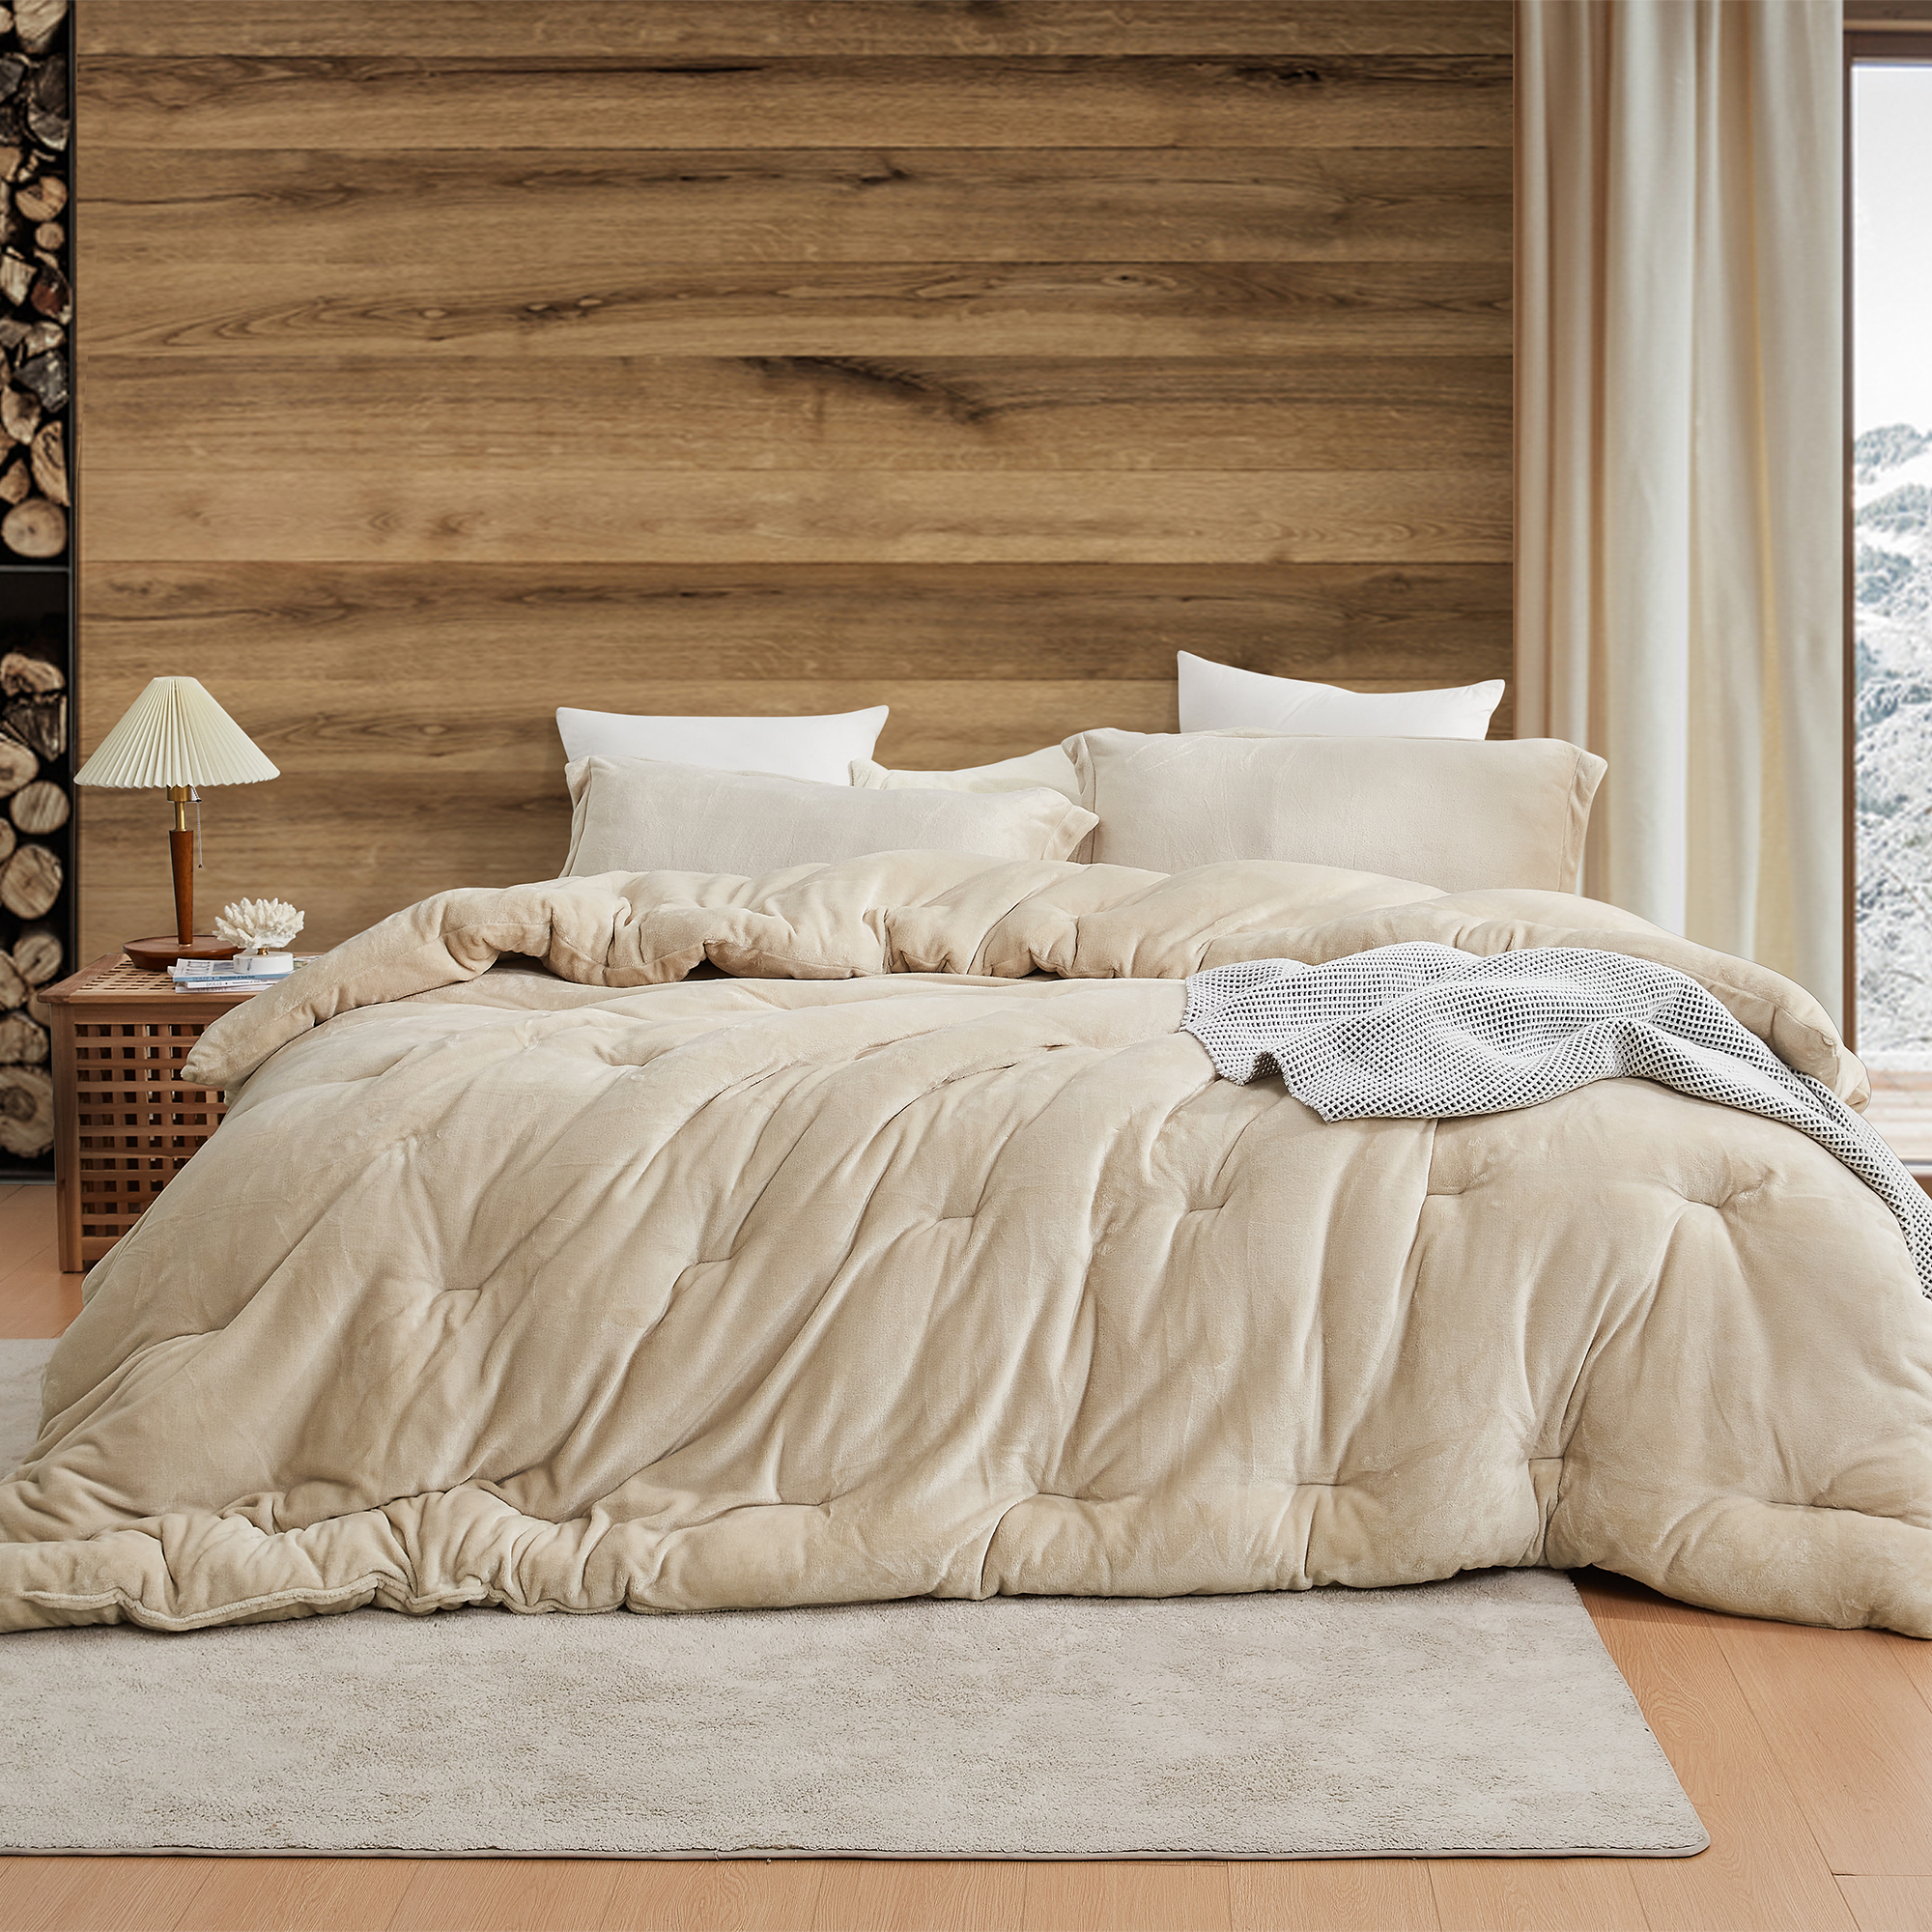 Thicker Than Thick - Coma Inducer® Queen Comforter - Standard Plush Filling - Birch